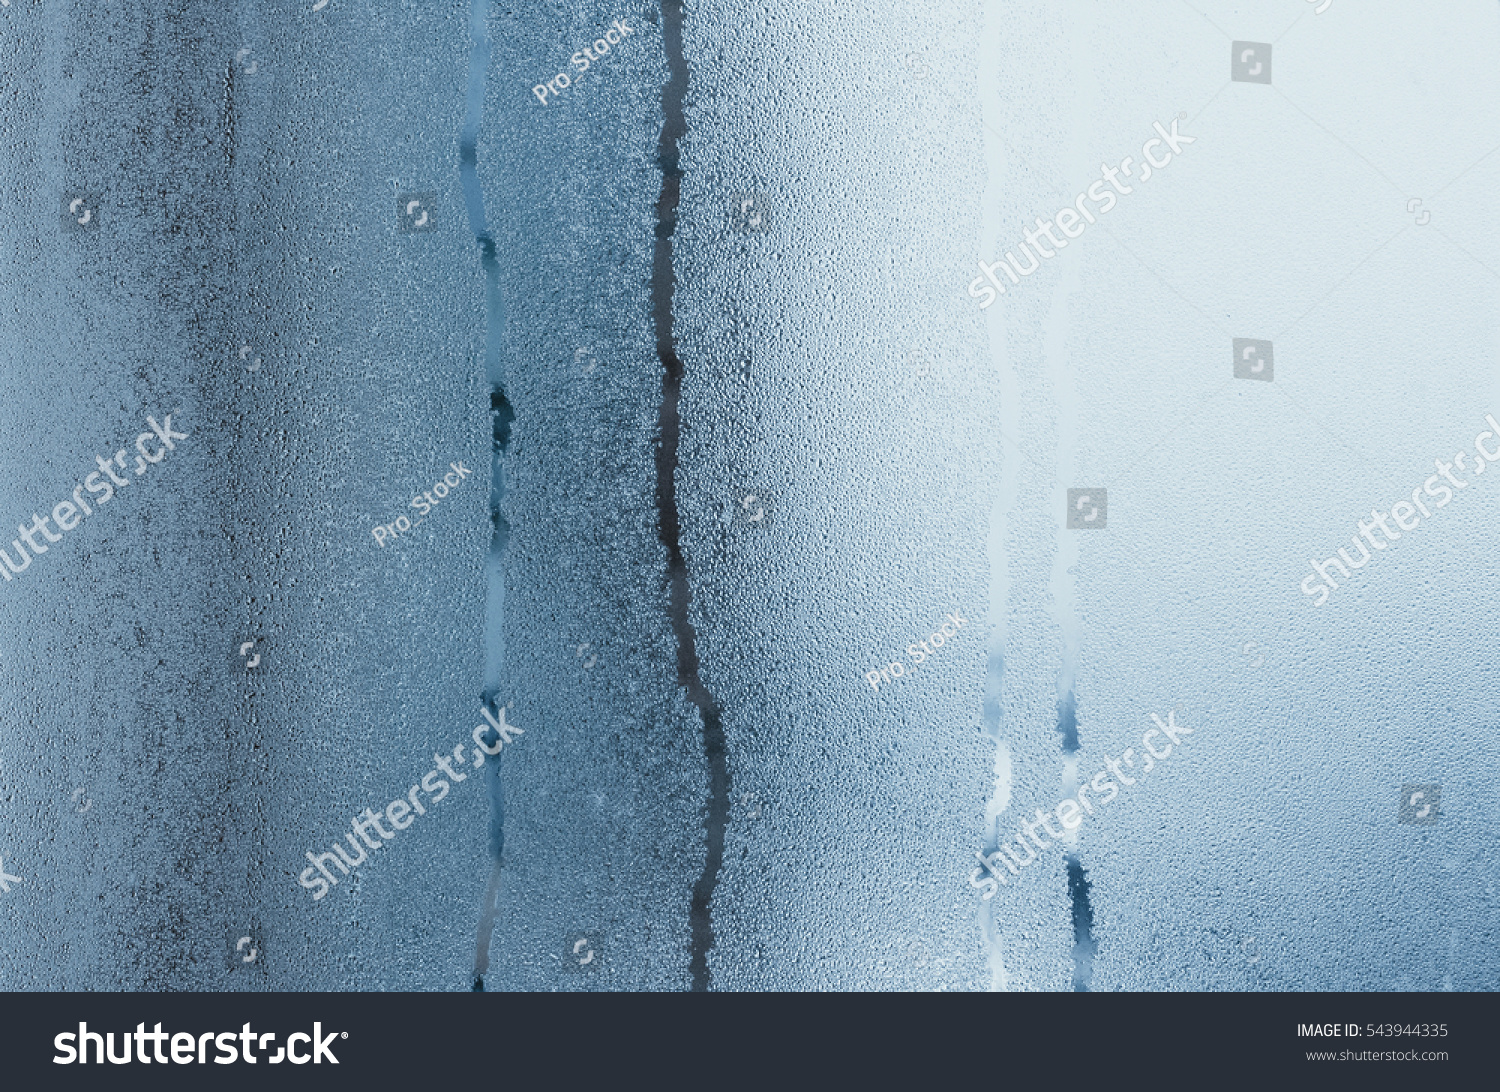 Condensation on the windows strong, high humidity in the room, cold tone #543944335